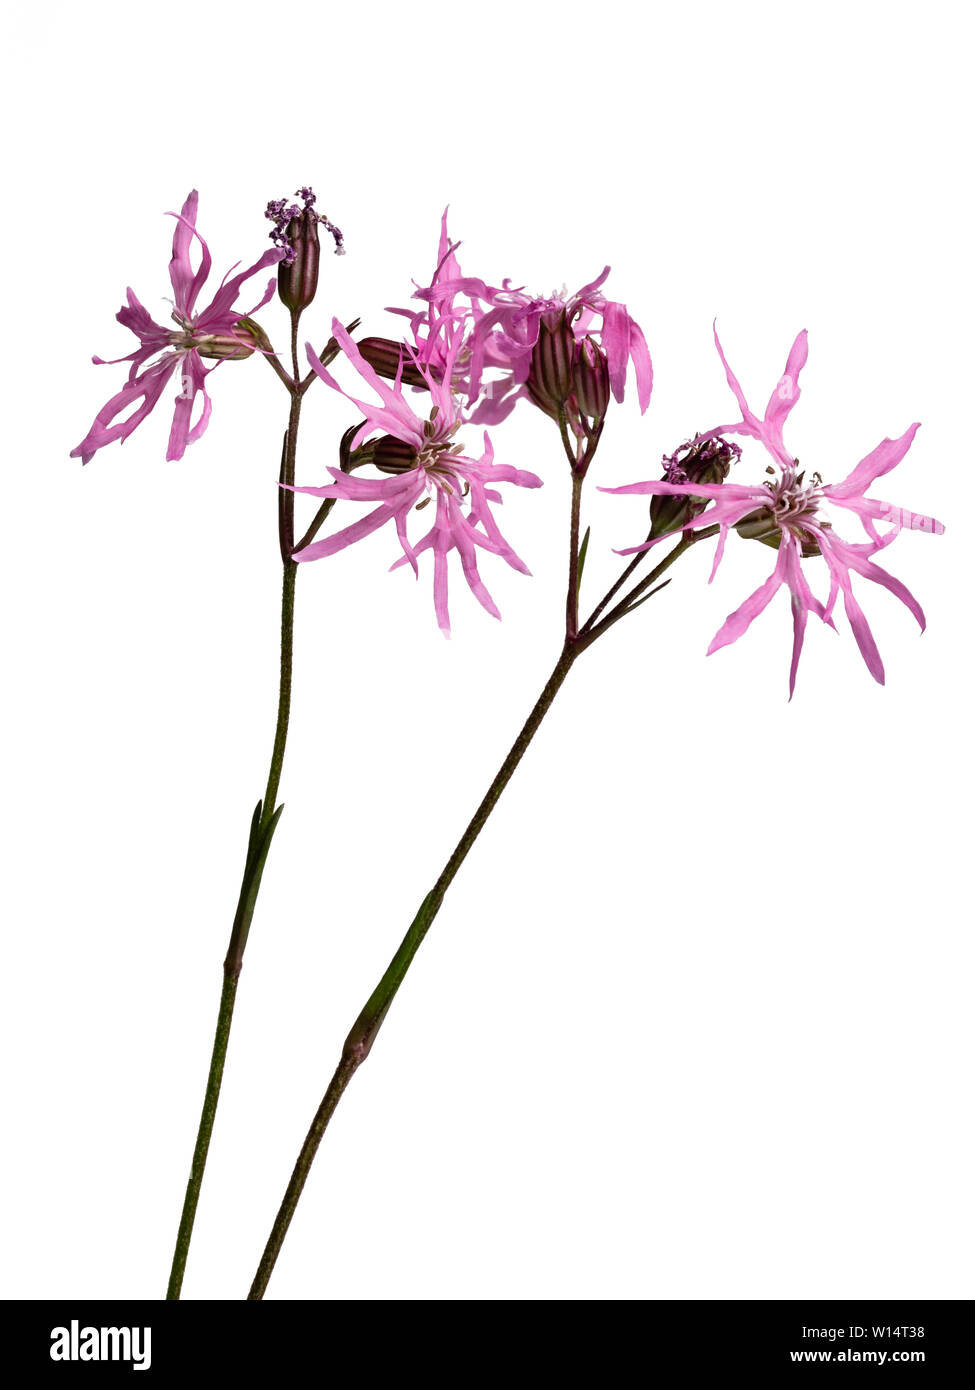 Ragged pink flowers of the UK wild and bog garden flower, Silene flos-cuculi, ragged robin, on a white background Stock Photo